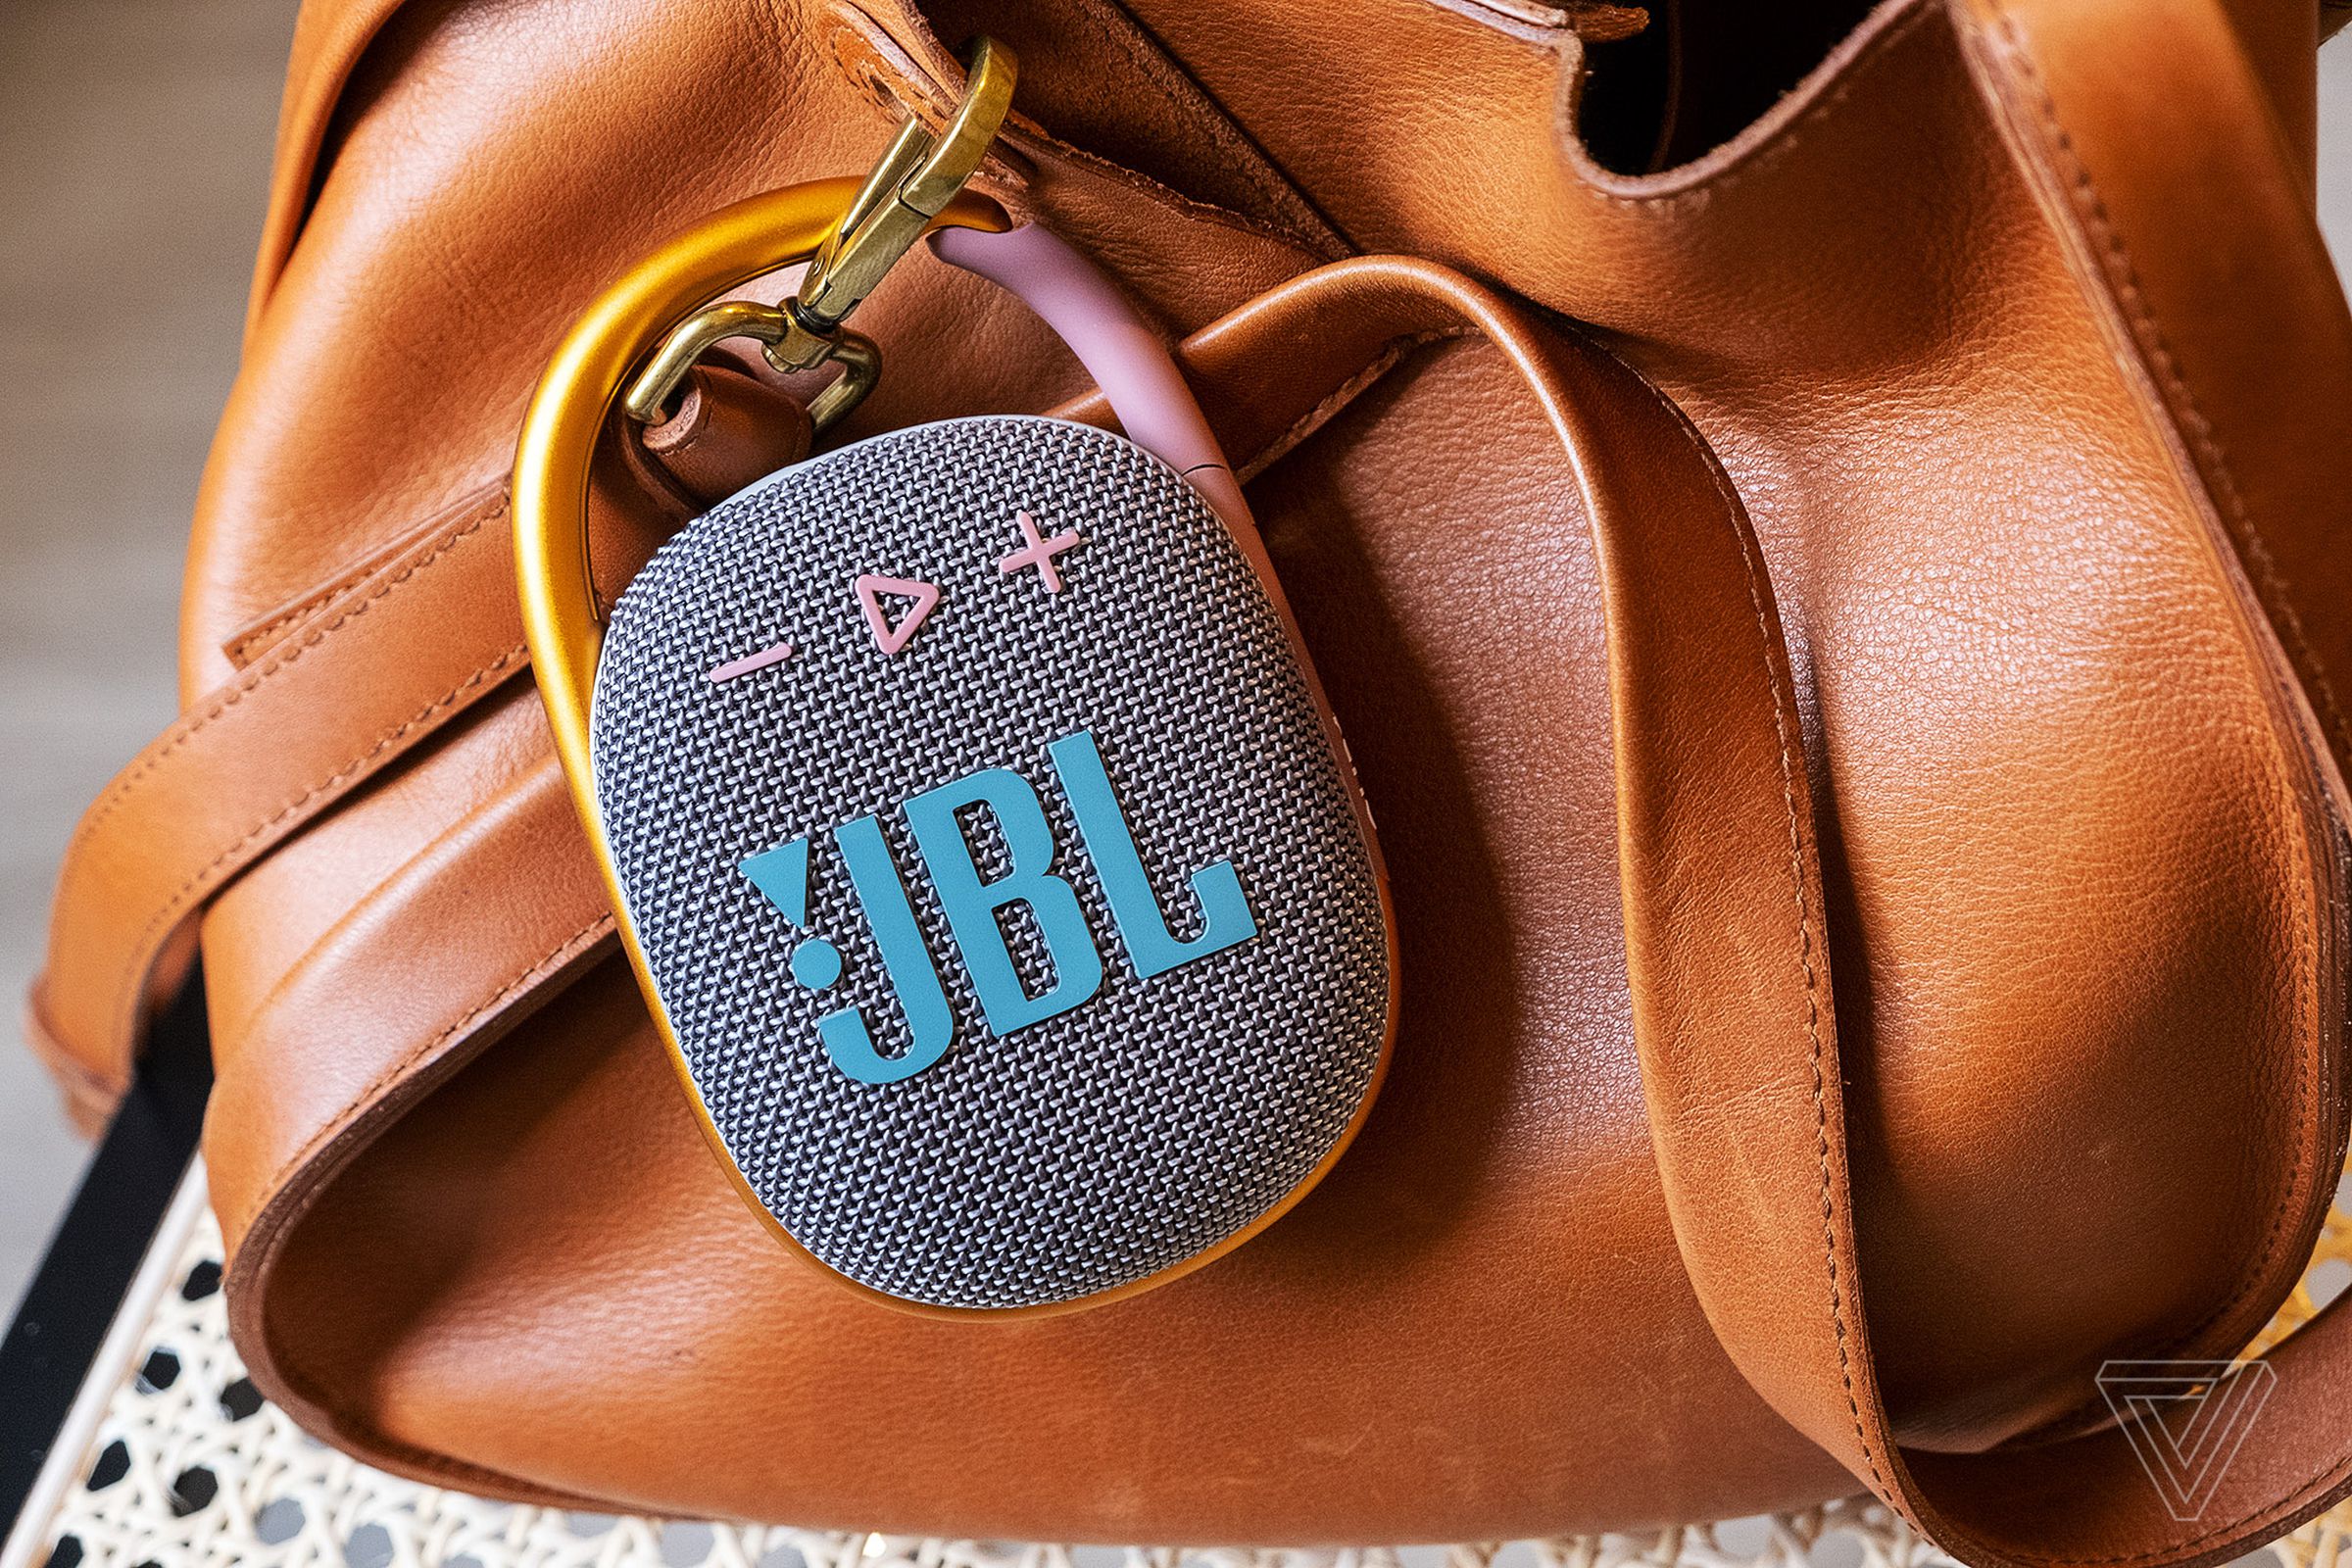 JBL’s Clip 4 can latch onto a bag or backpack with ease.